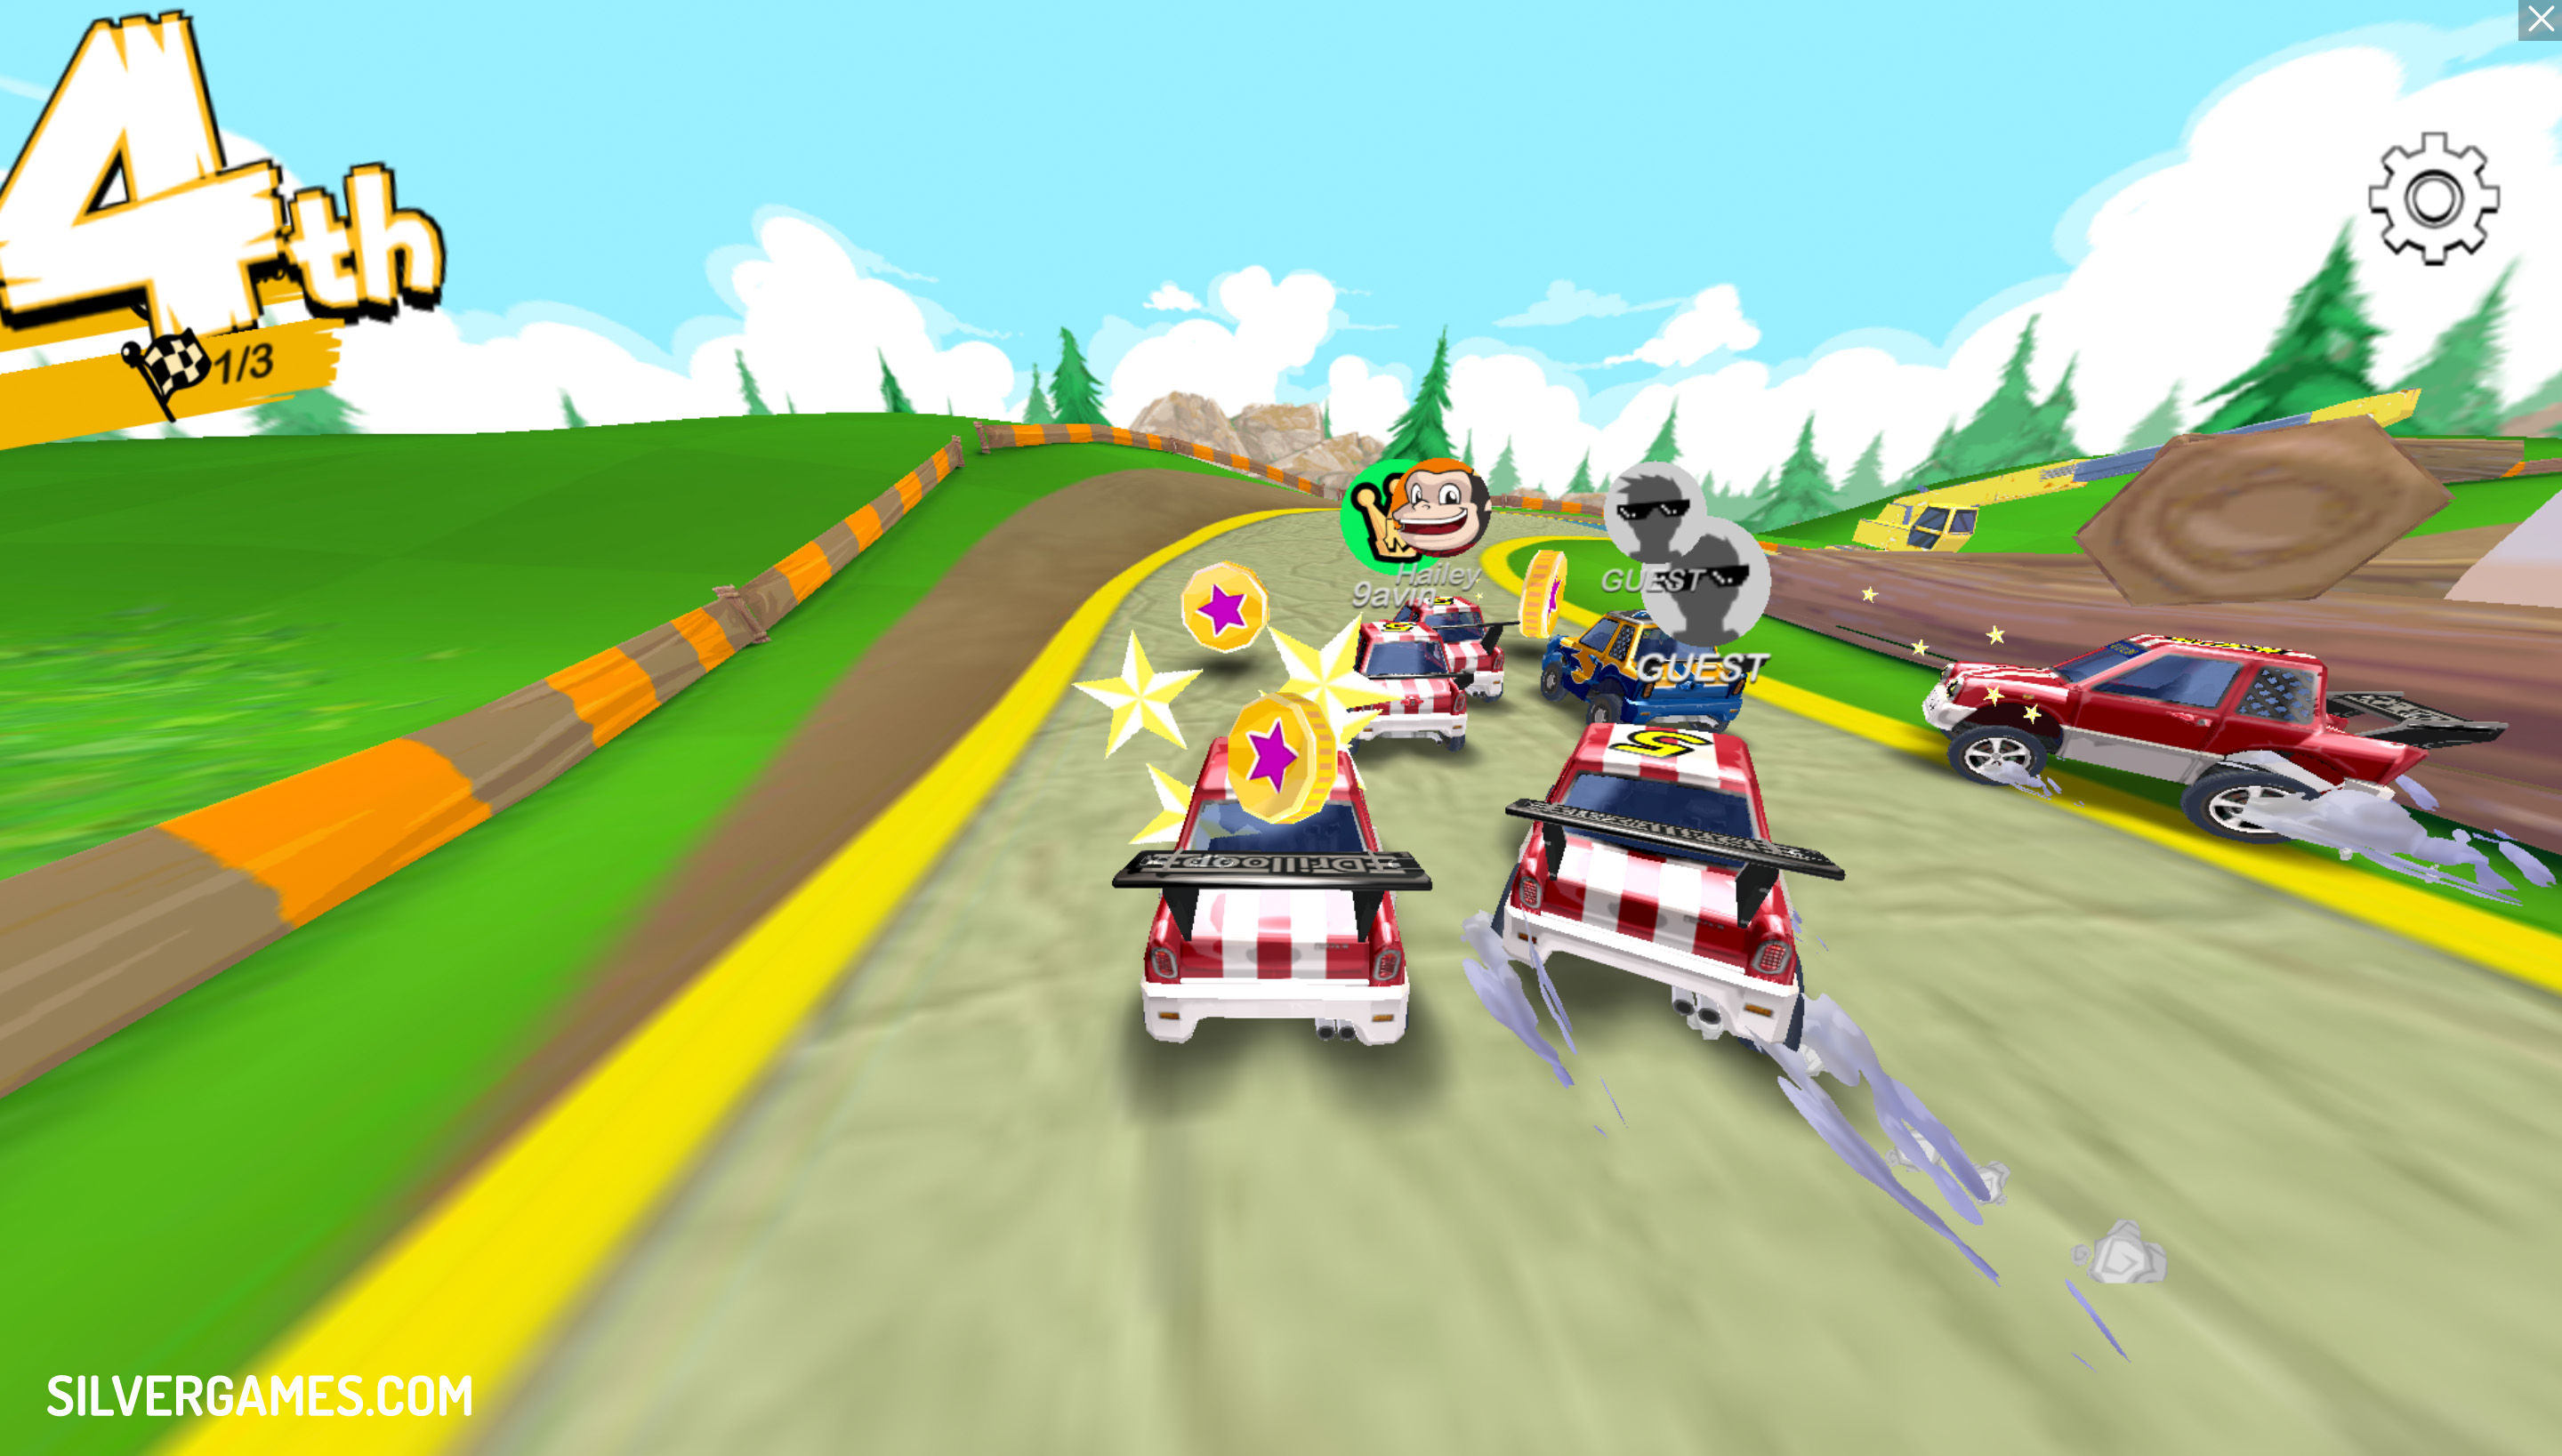 DRIFT DUDES free online game on